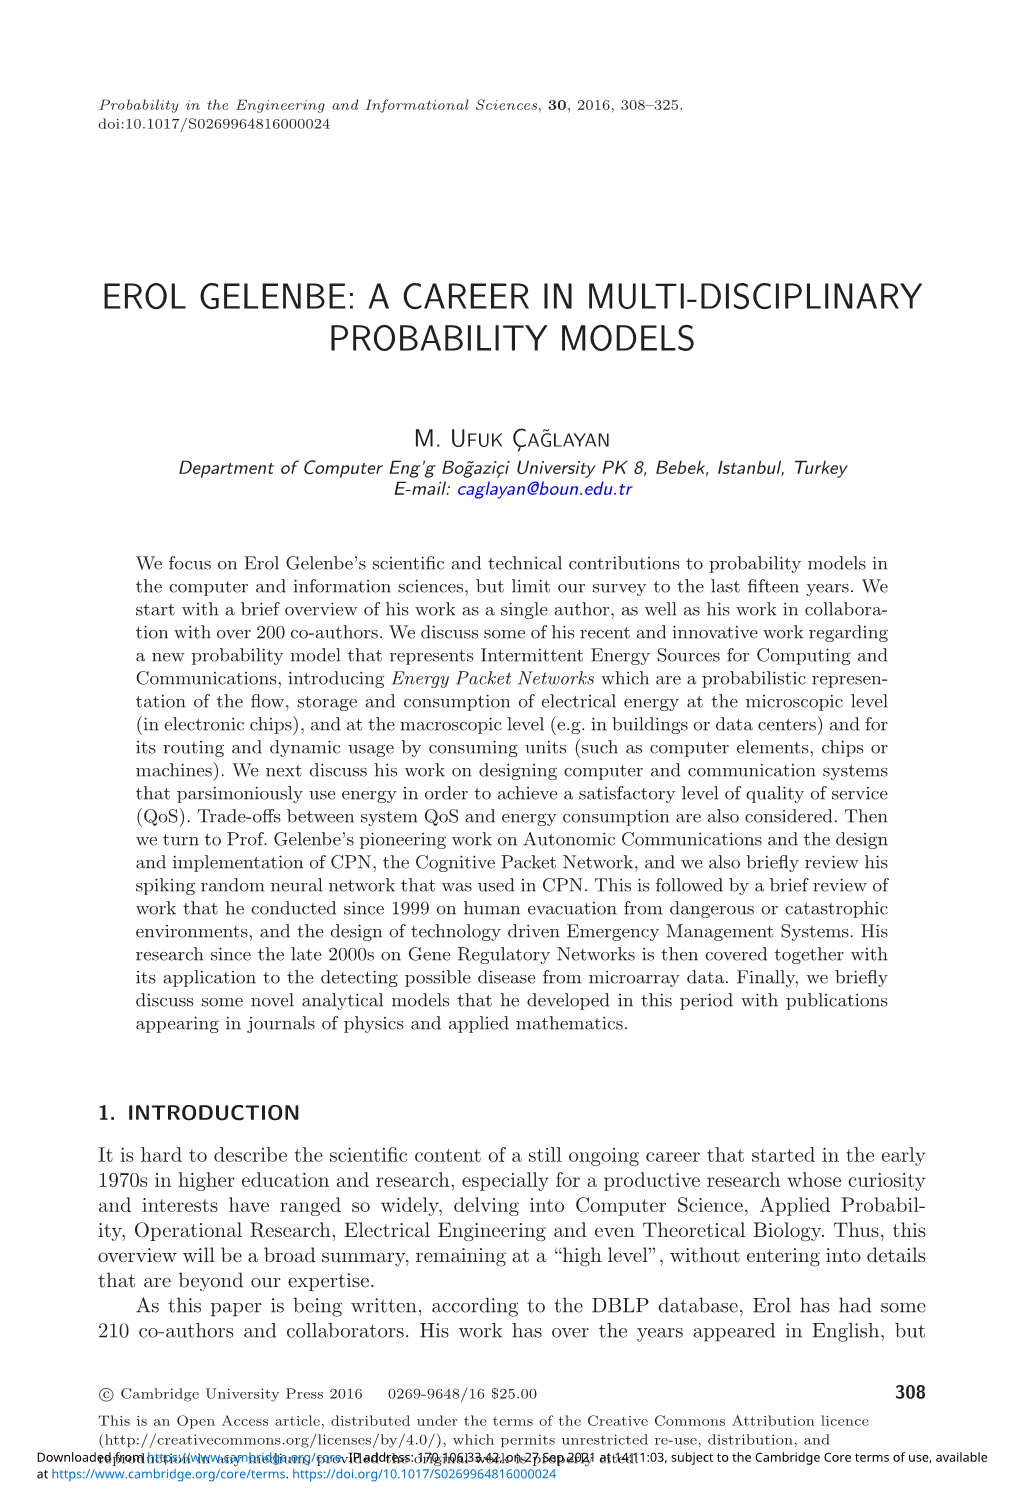 Erol Gelenbe: a Career in Multi-Disciplinary Probability Models